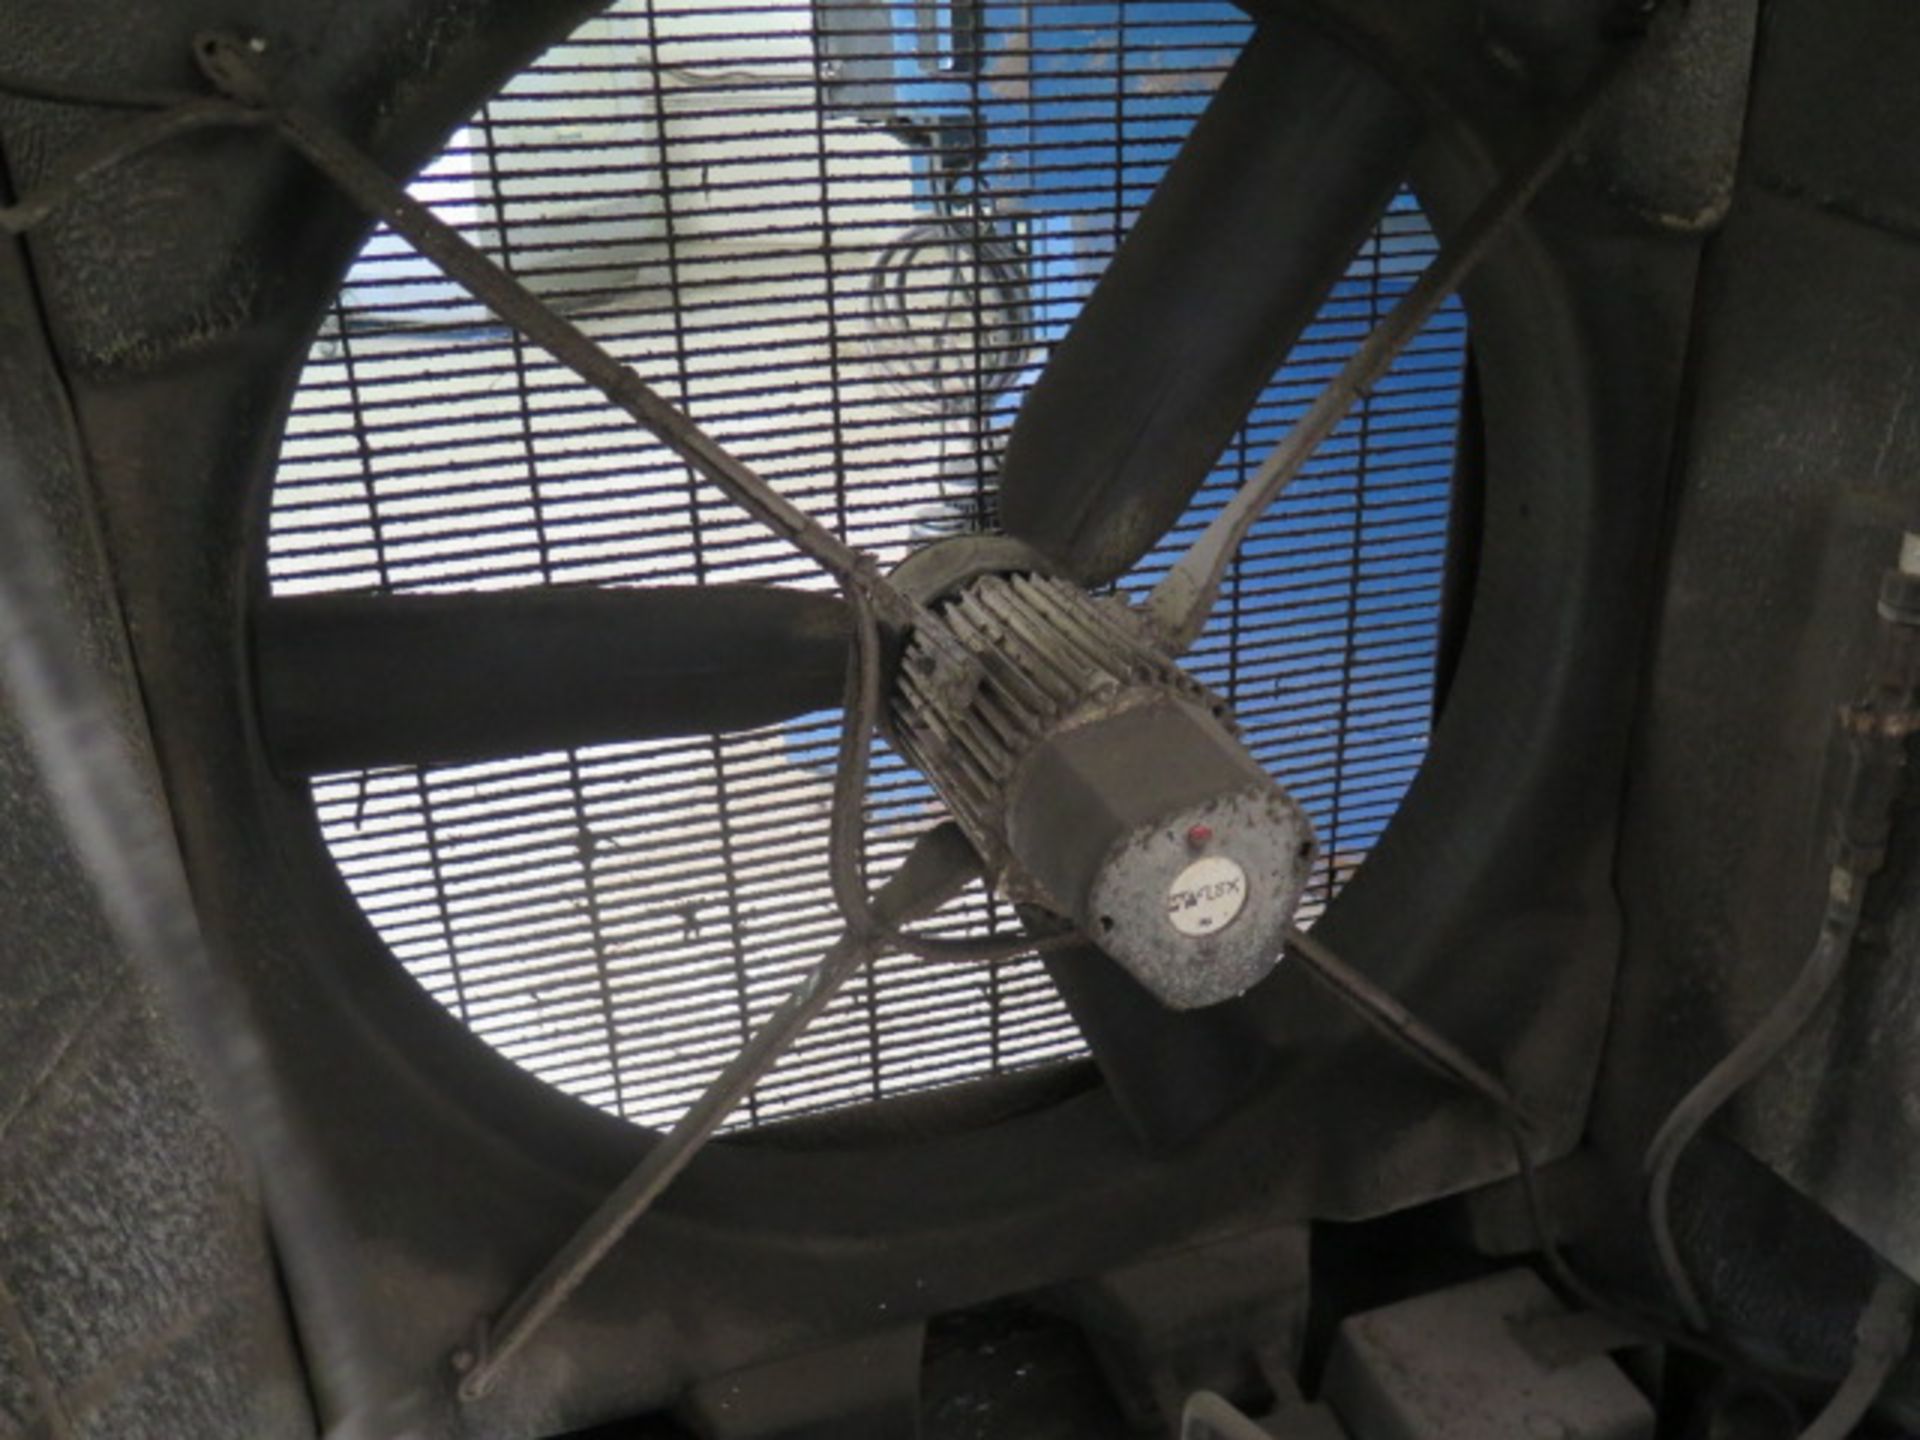 Porta-Cool mdl. HP Portable Swamp Cooler (NEEDS Filter Element) (SOLD AS-IS - NO WARRANTY) - Image 7 of 7